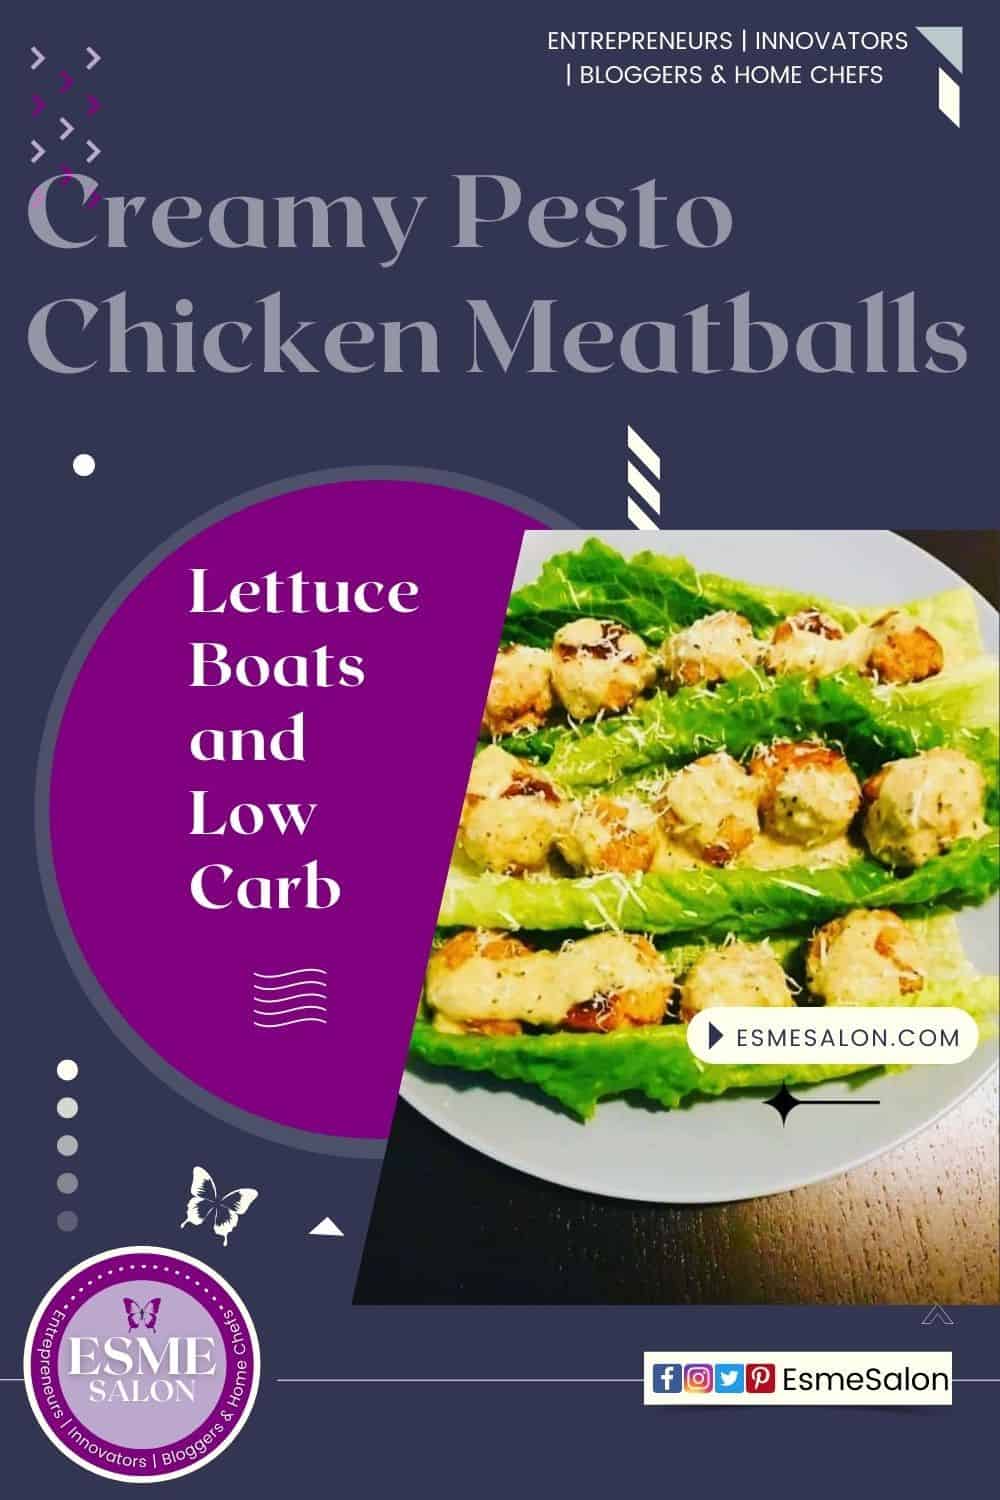 Creamy Pesto Chicken Meatballs placed in lettuce leaves on a white platter